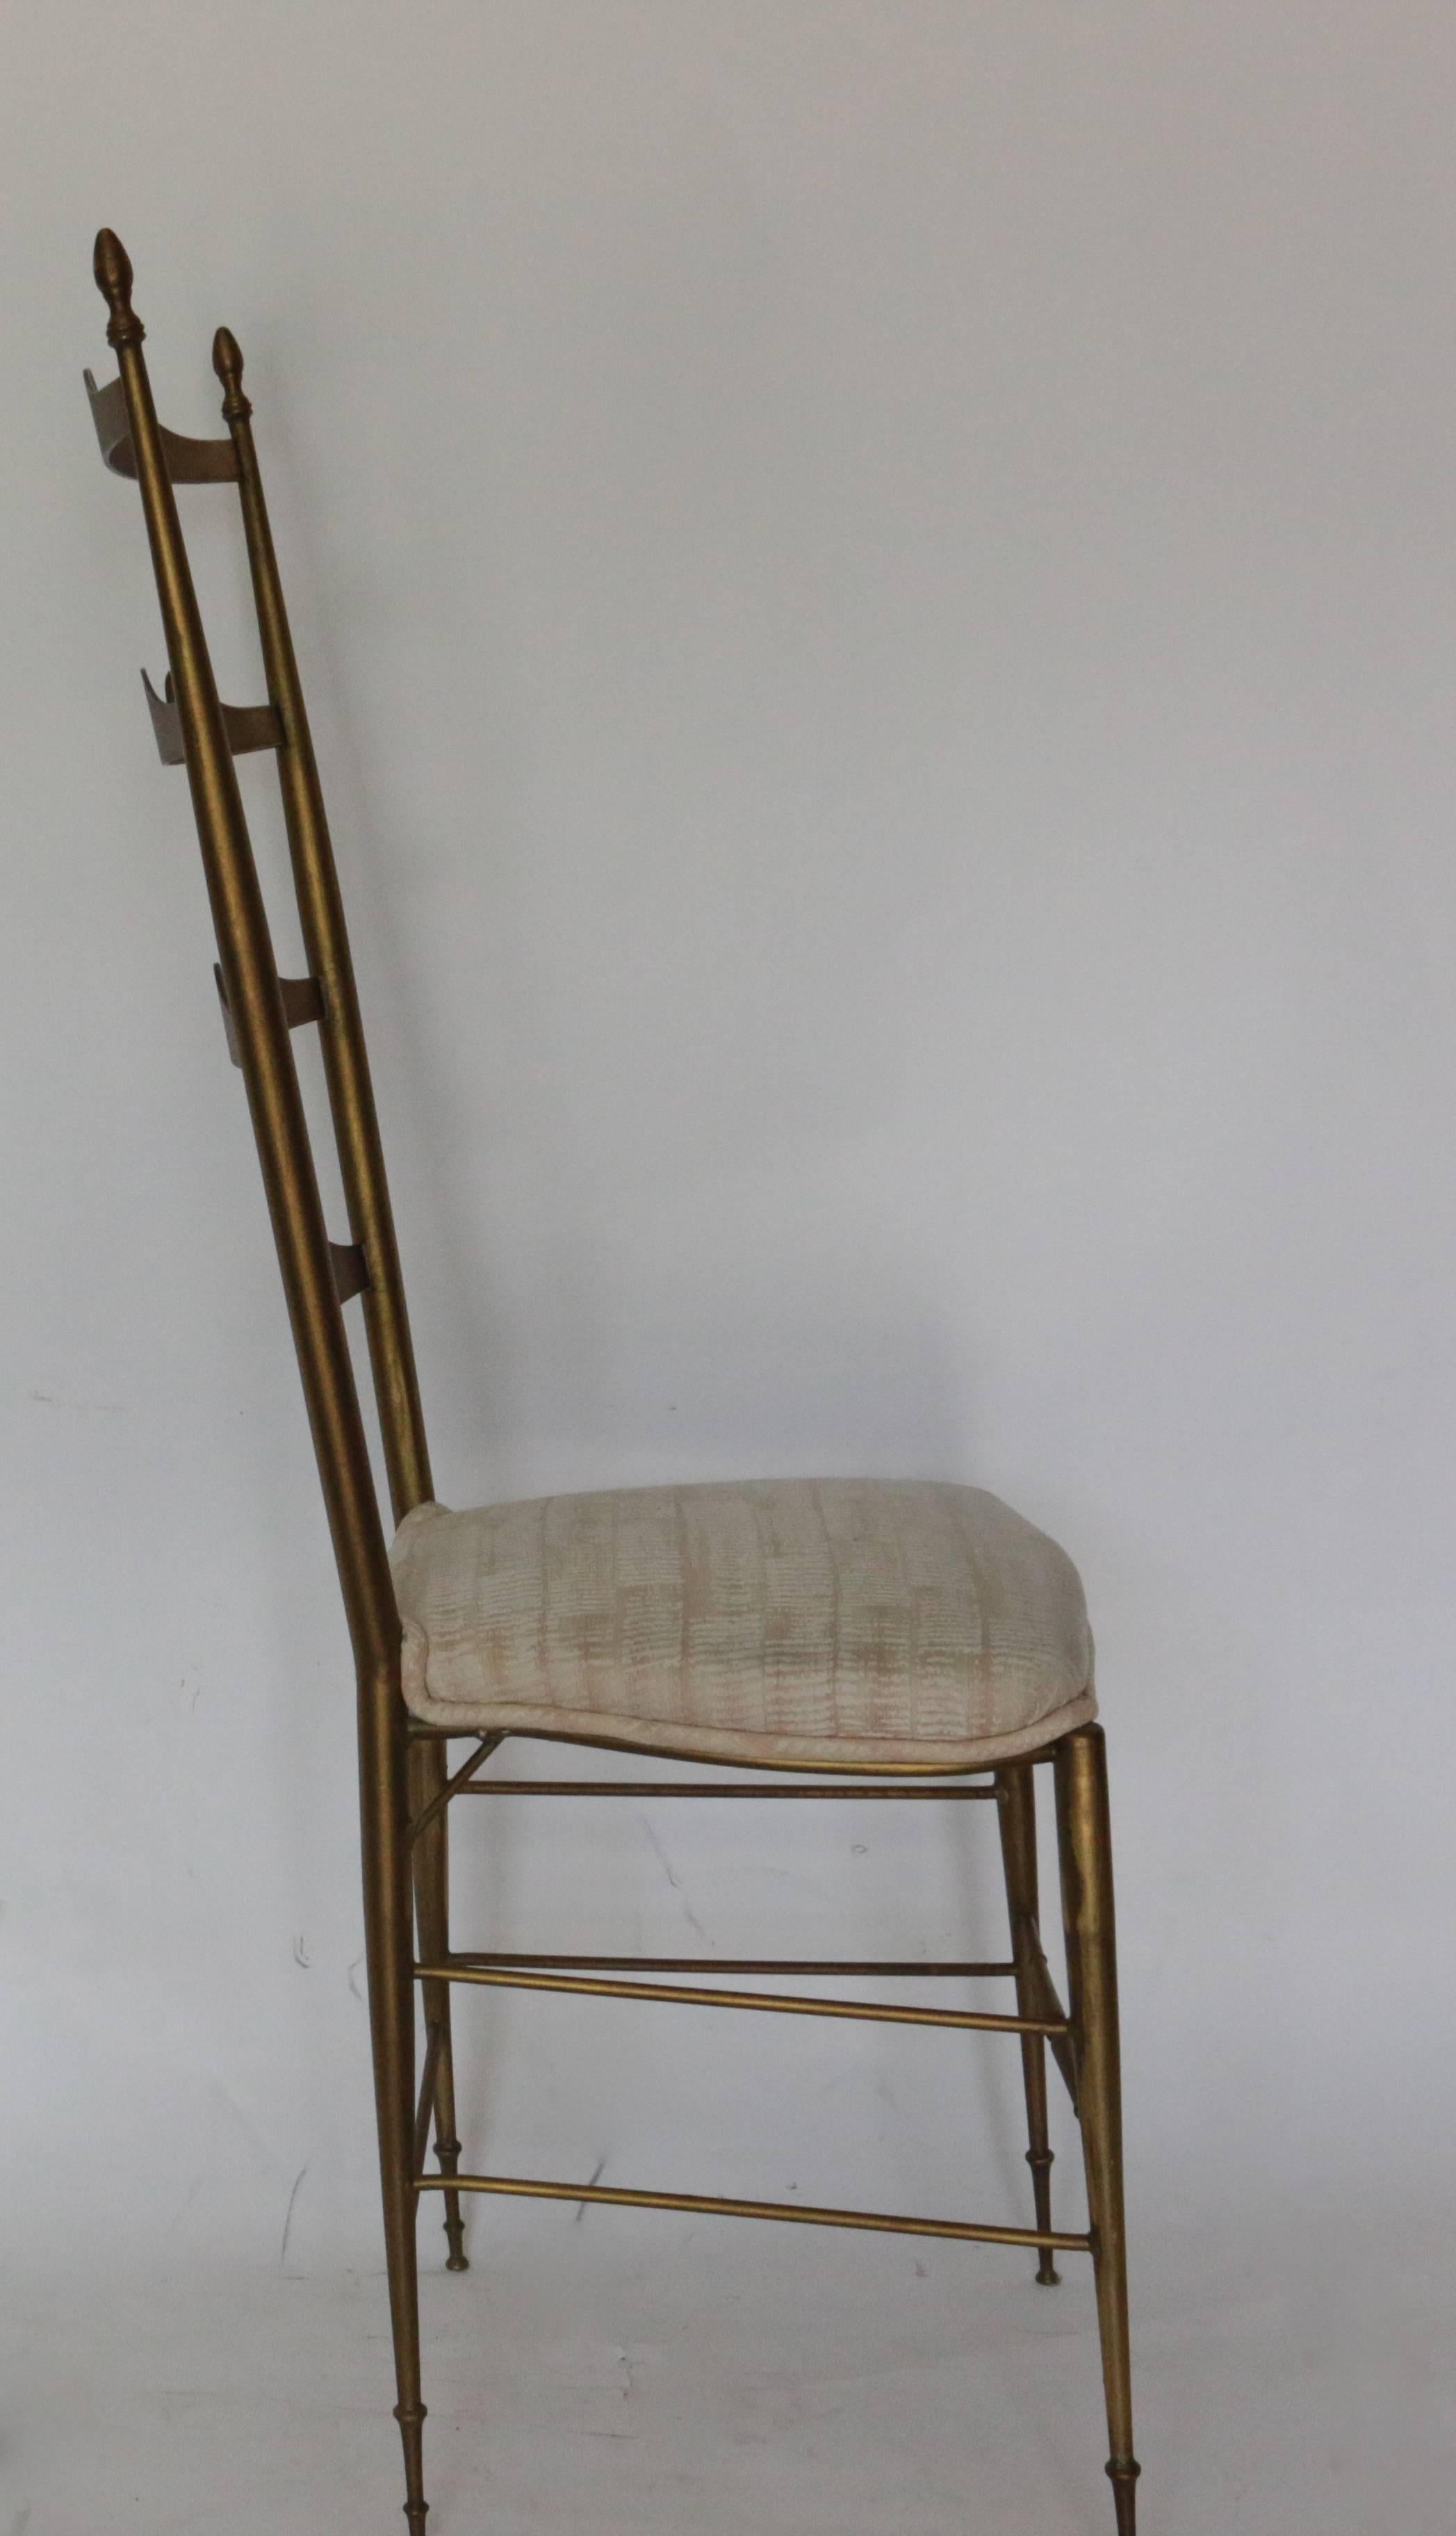 An elegant ladder back brass original Chiavari chair covered with imported fabric. In excellent used condition.